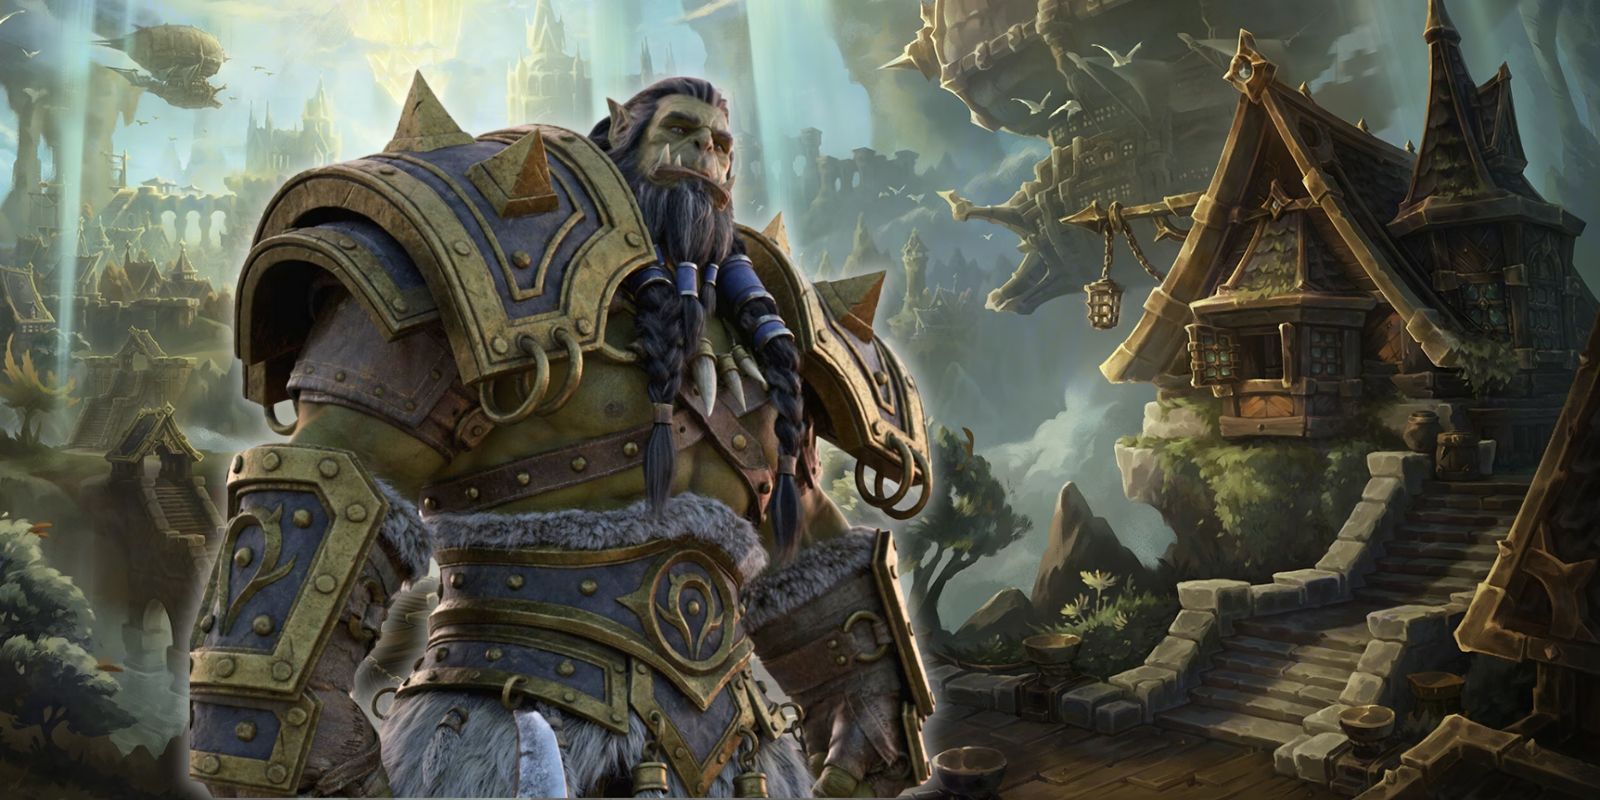 World of Warcraft The War Within setting with a peaceful town and an image of Thrall in front